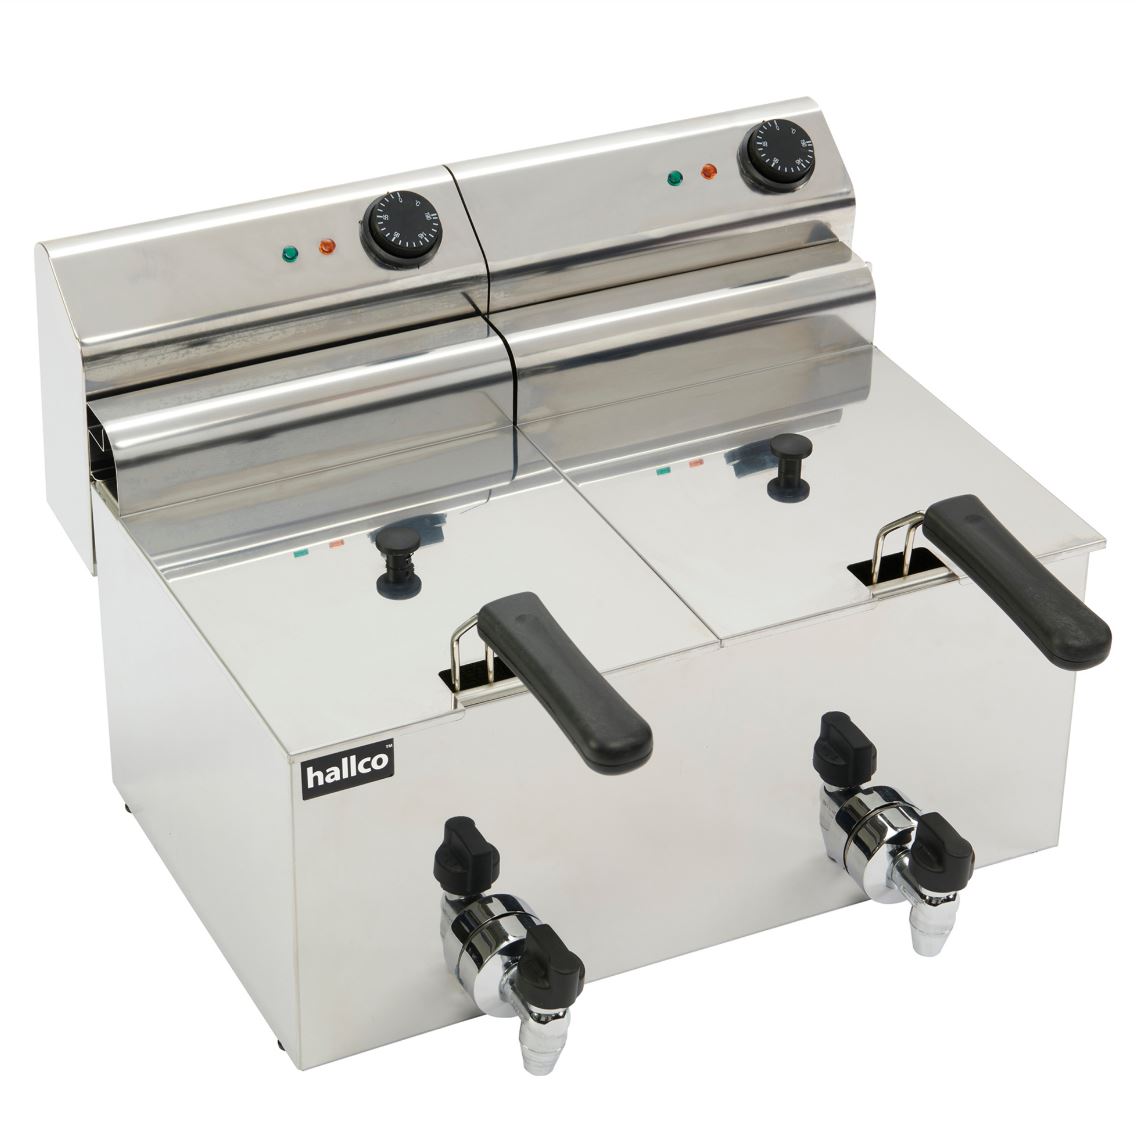 Hallco MDF88T Double Tank Fryer with Drain 